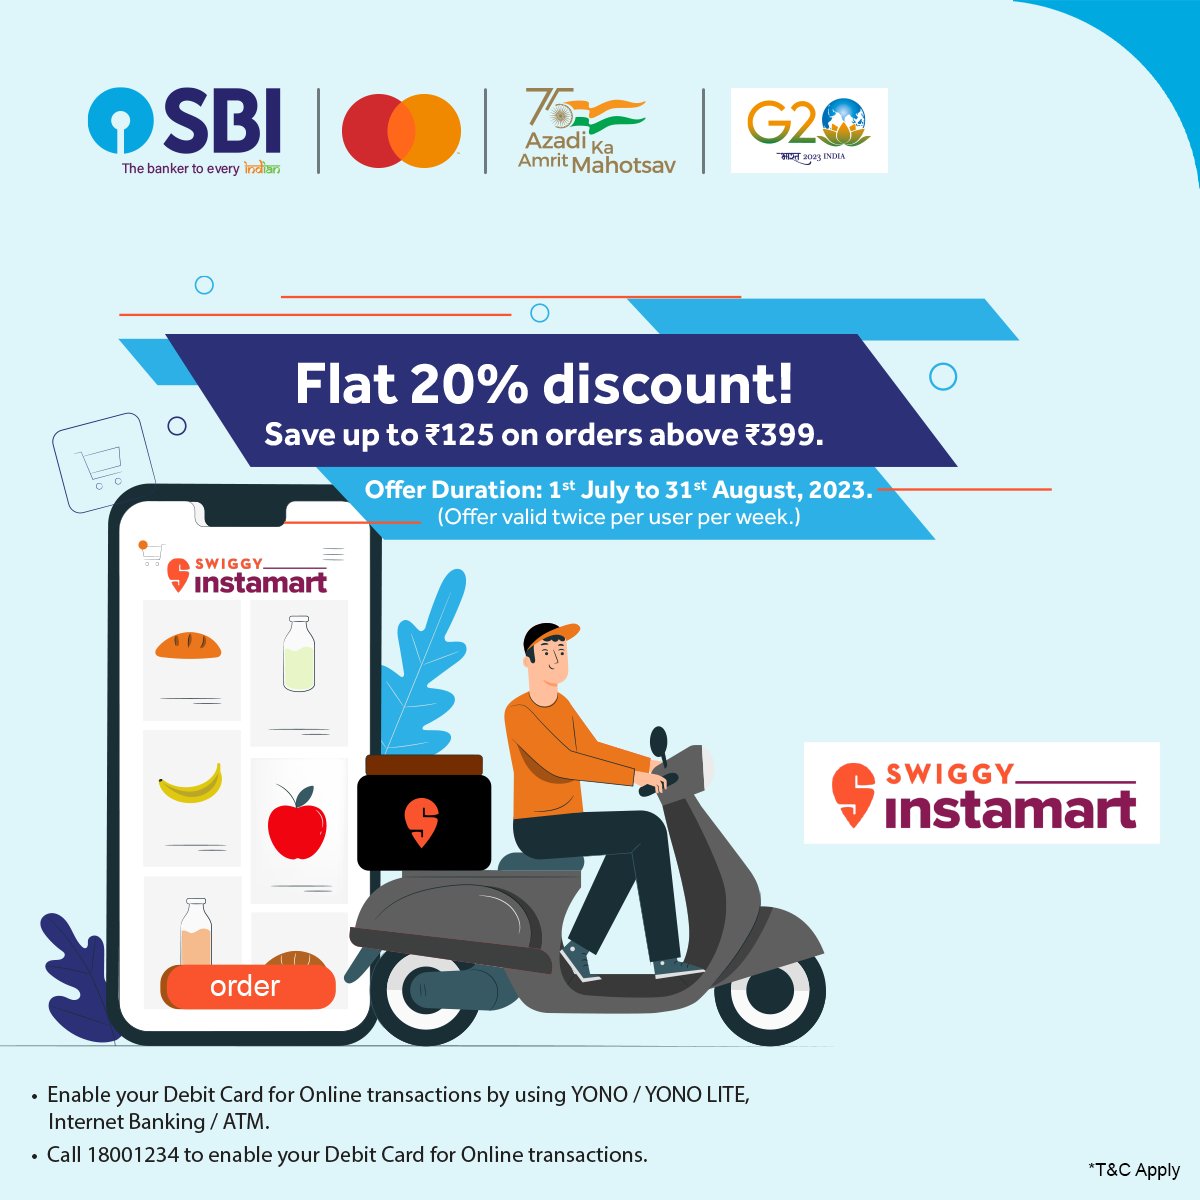 Discover everyday savings on essential products with SBI.
Order now!

For details, visit: bank.sbi/web/personal-b…

#SBI #Offers #DebitCards #DebitCardOffers #SwiggyInstamart #AmritMahotsav